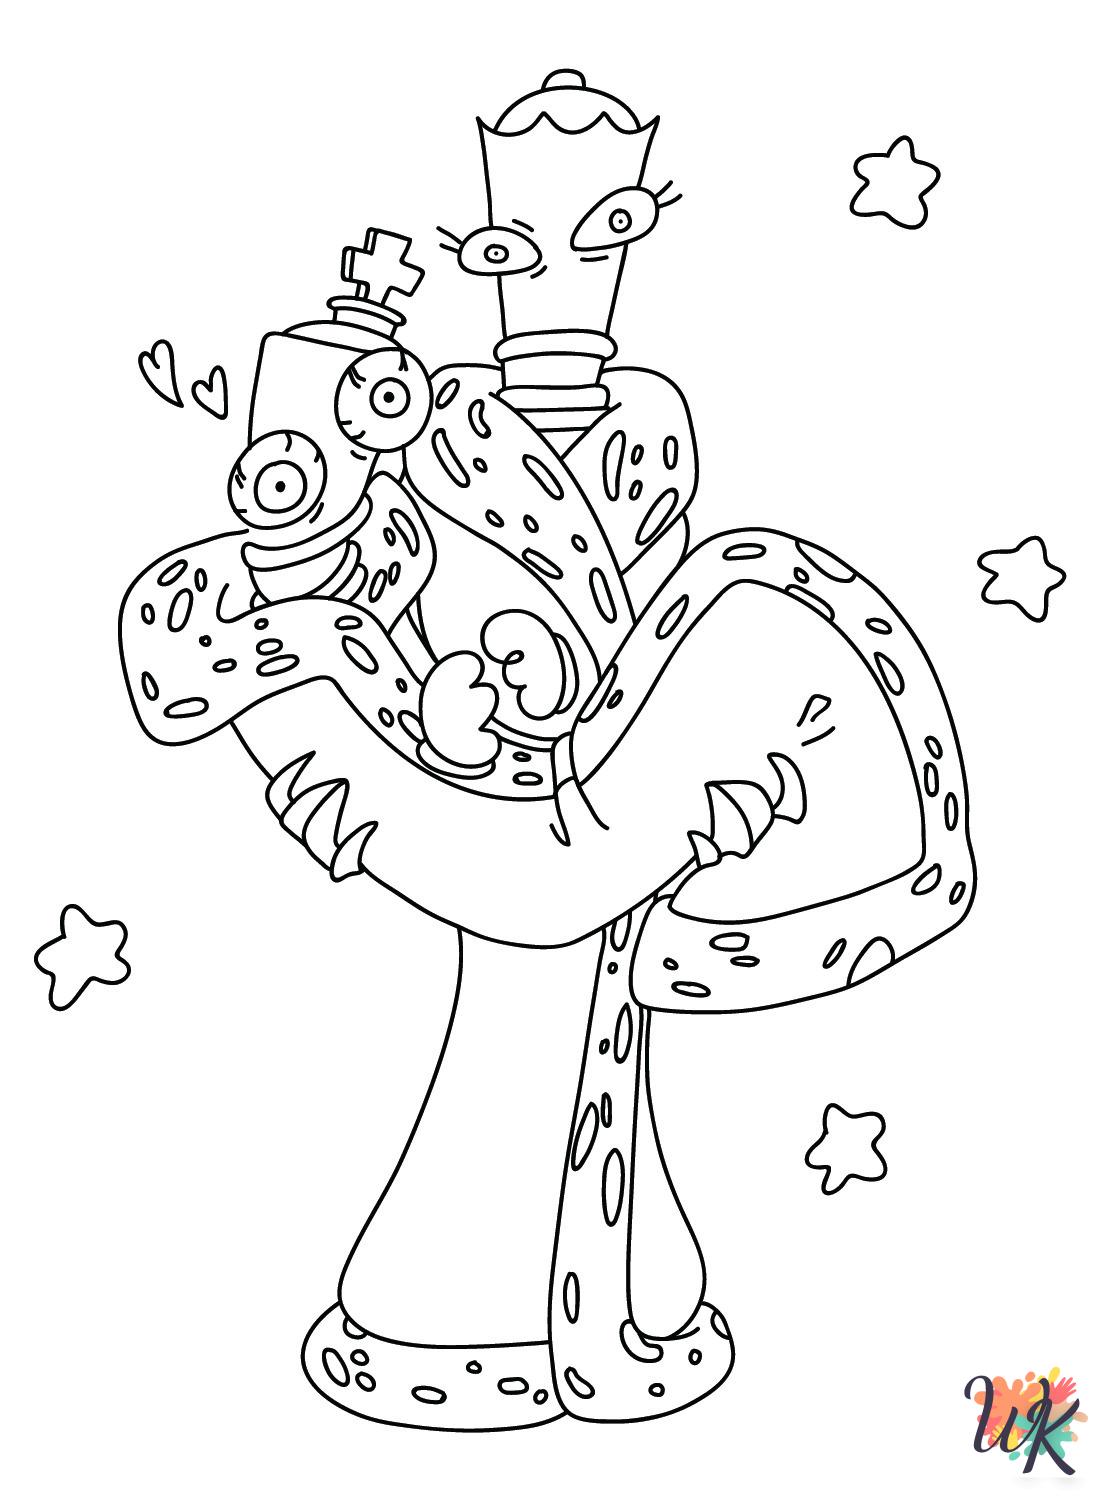 The Amazing Digital Circus coloring pages grinch